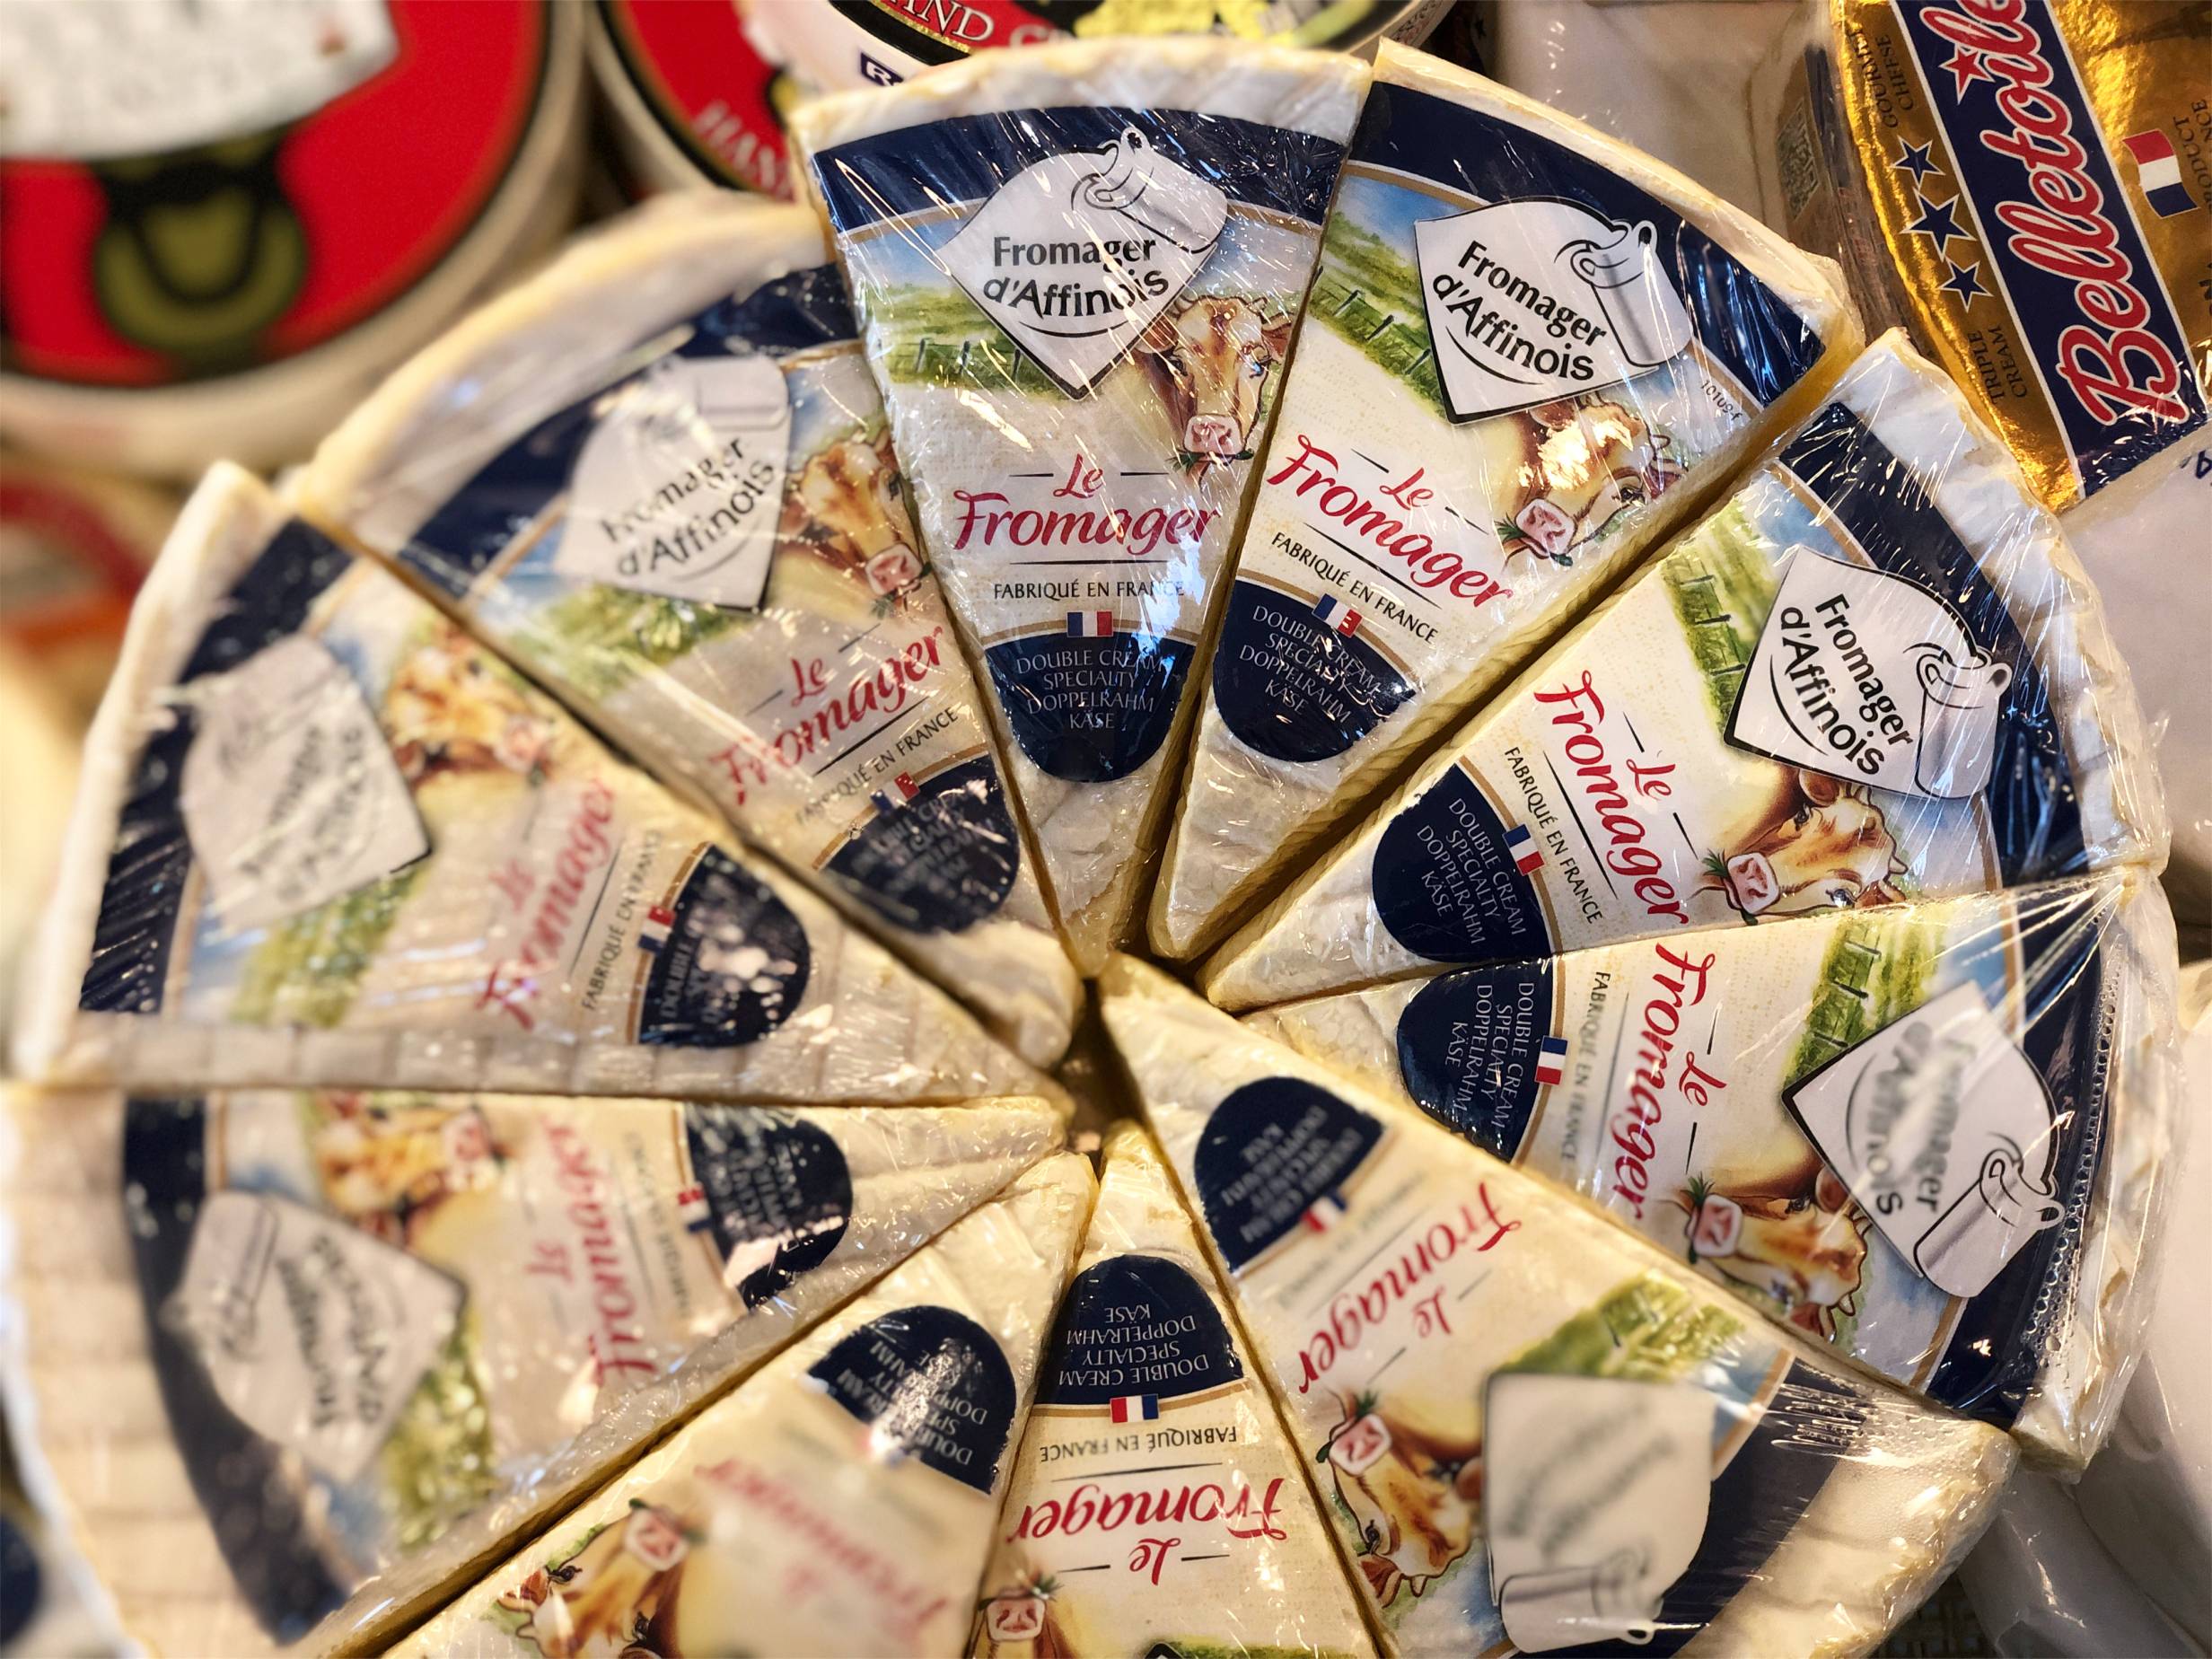 A circle of wedges of Fromager dâ€™Affinois, each individually wrapped. It is a white cheese with a blue stripe label. Photo by Alyssa Buckley.